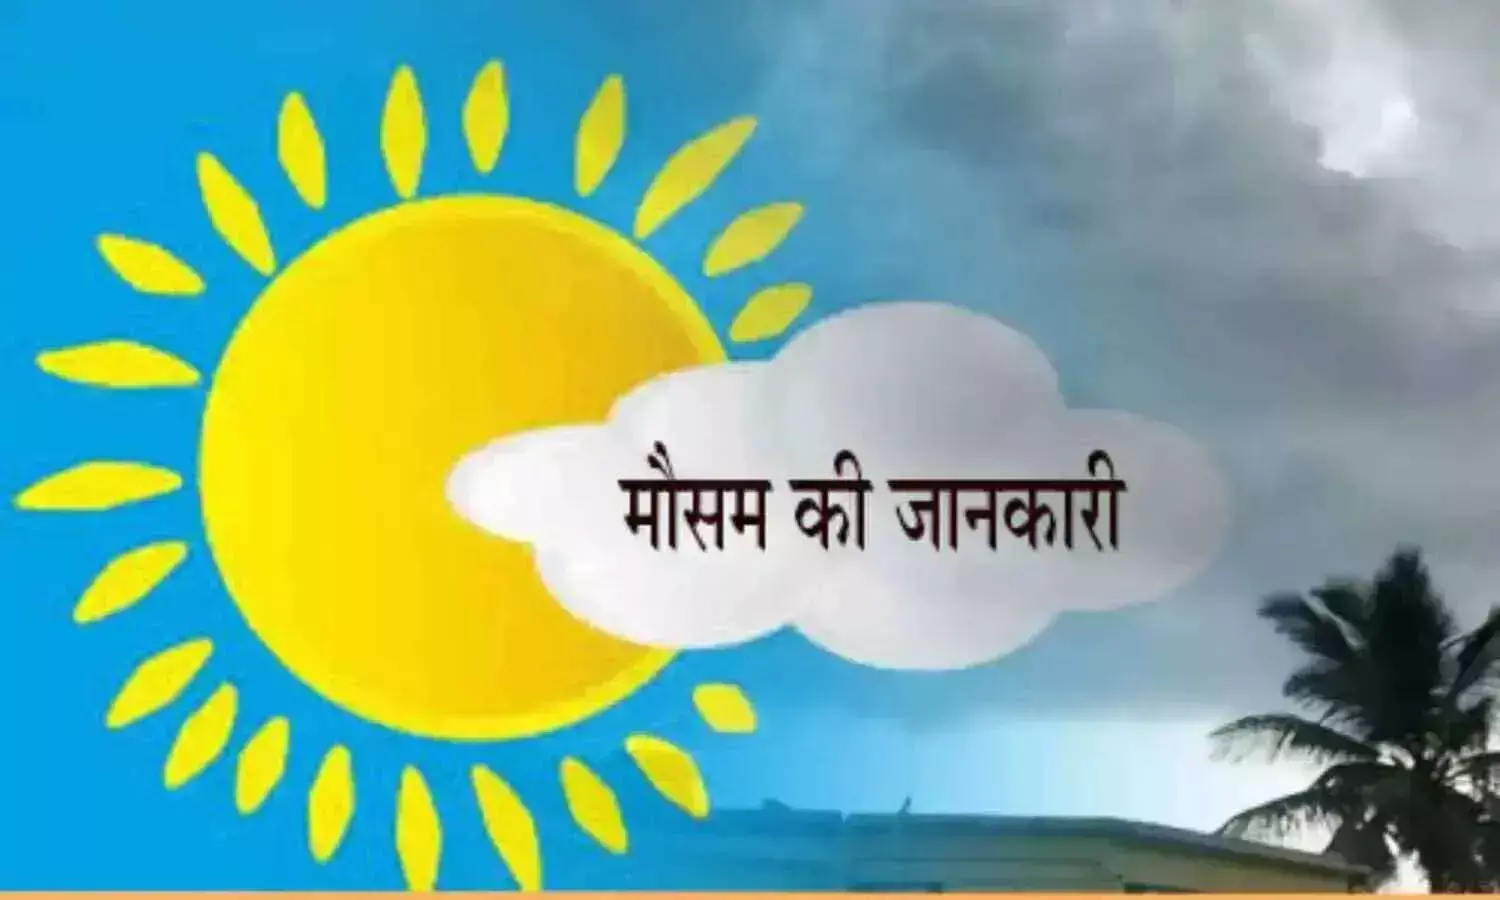 Weather will remain dry in most areas of UP today, know weather updates